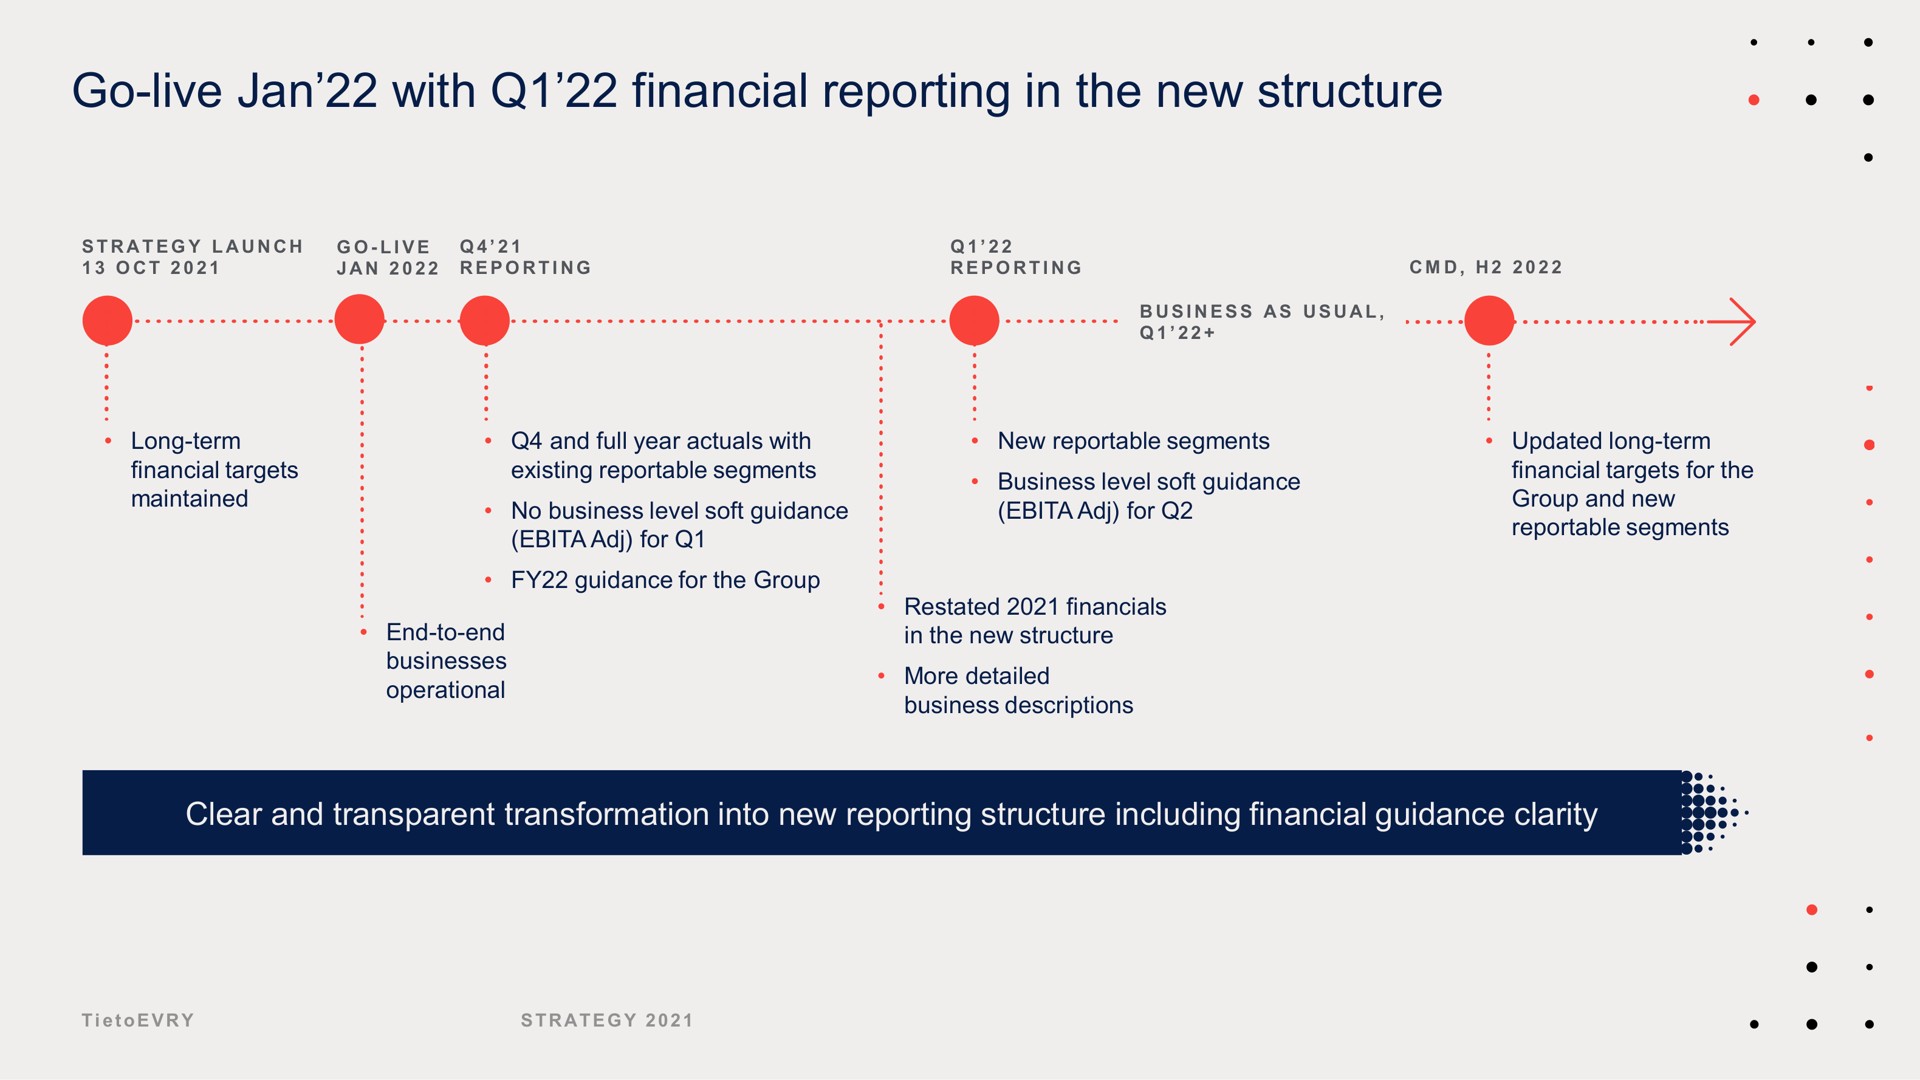 go live with financial reporting in the new structure | Tietoevry